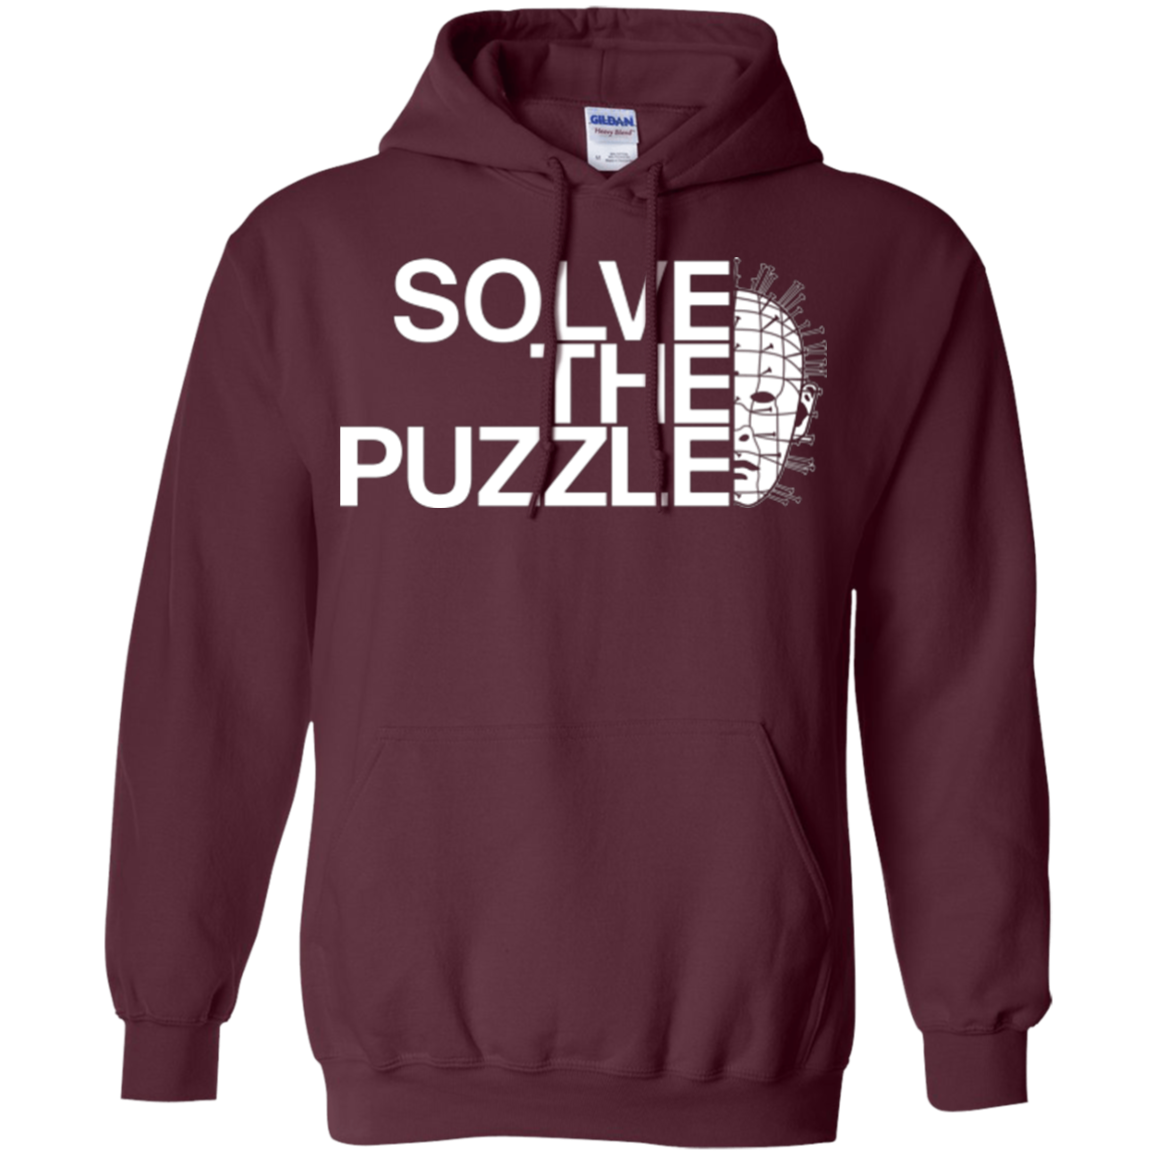 Solve The Puzzle V2 Pullover Hoodie